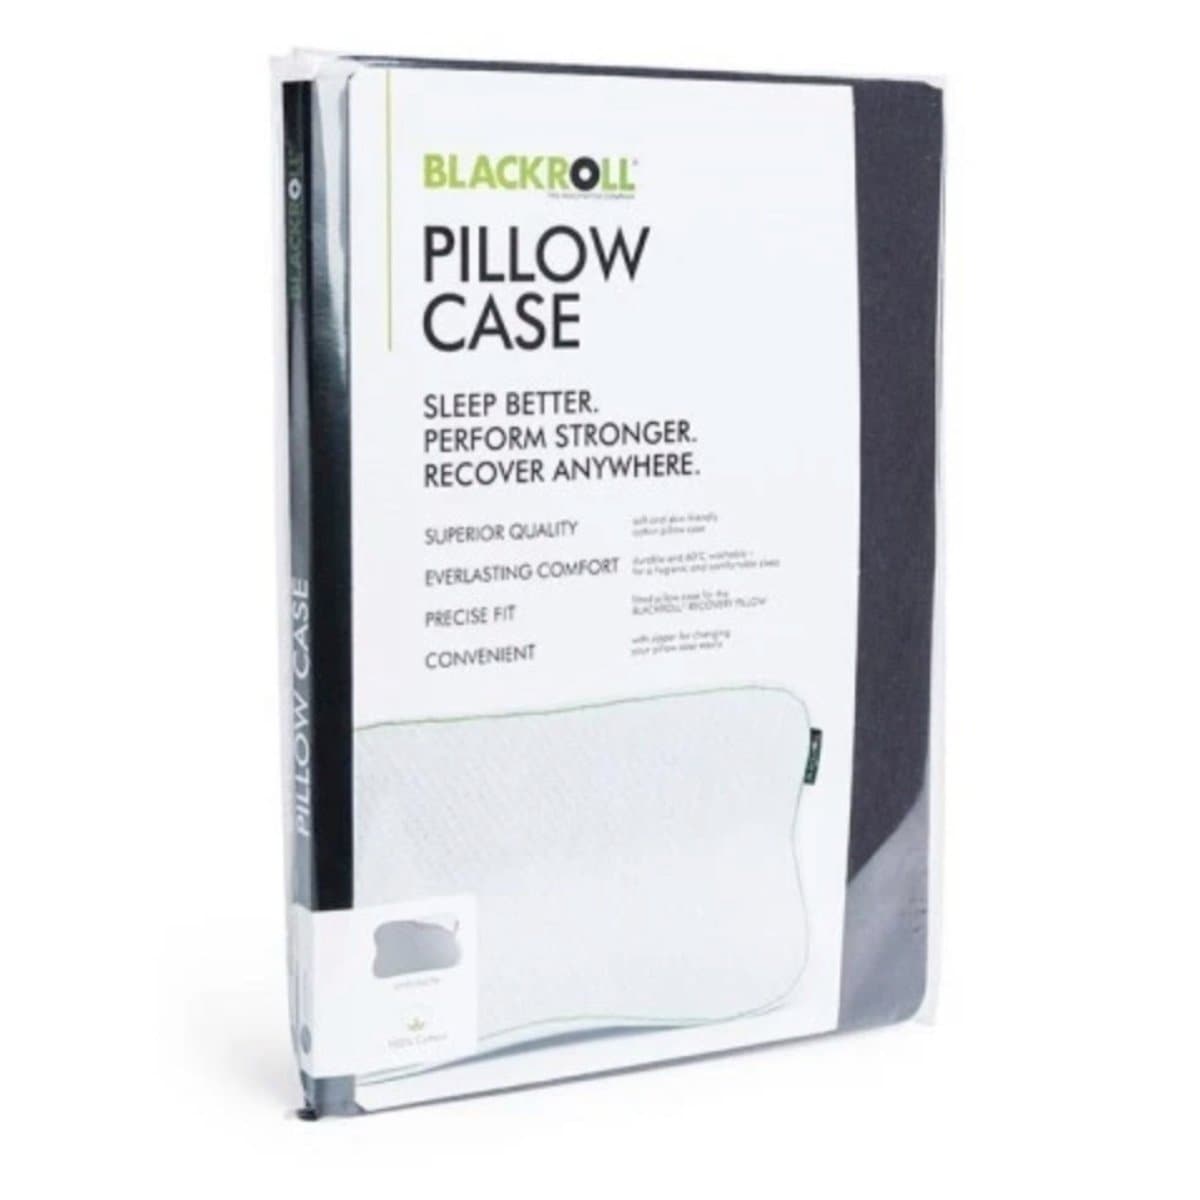 BLACKROLL Pillow CASE for Recovery Pillow, Jersey, Anthracite